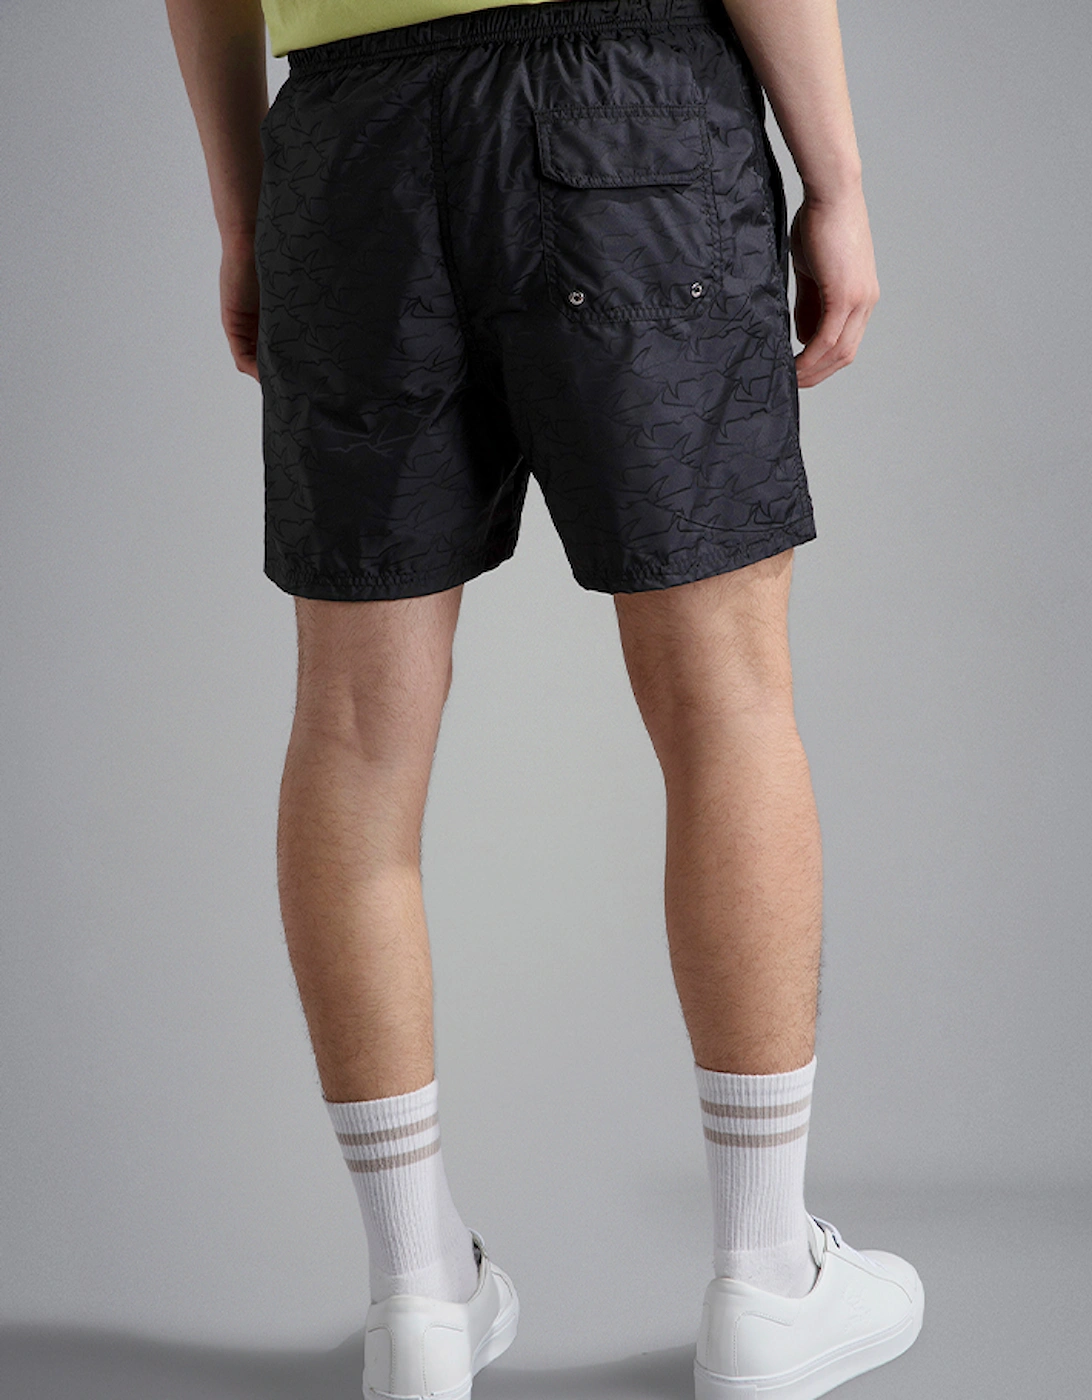 Men's Swim Shorts with All Over Shark Print